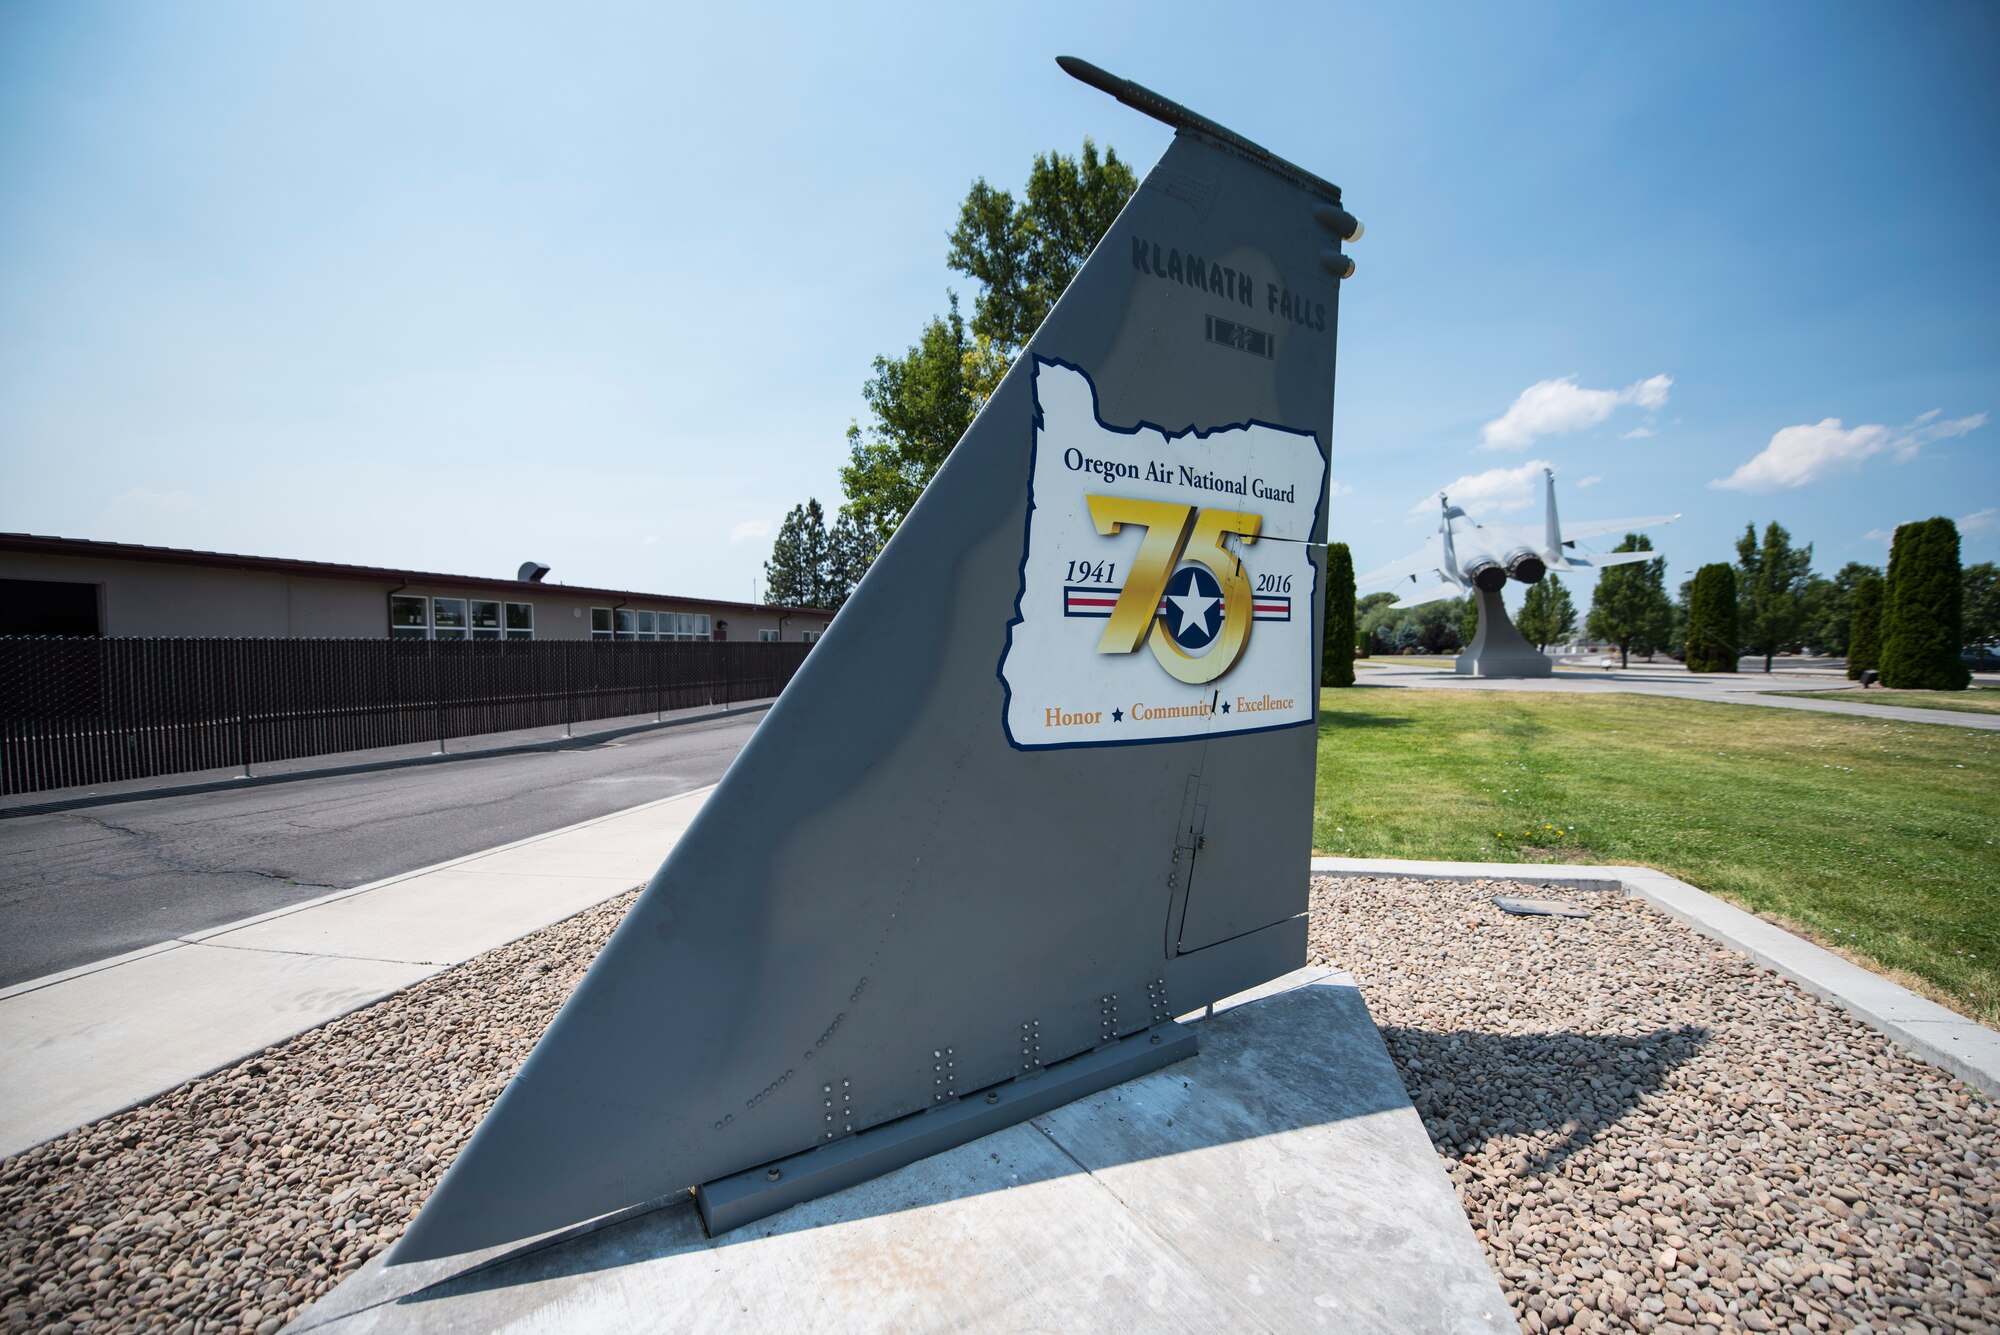 Kingsley Field shows off its heritage with new tail display